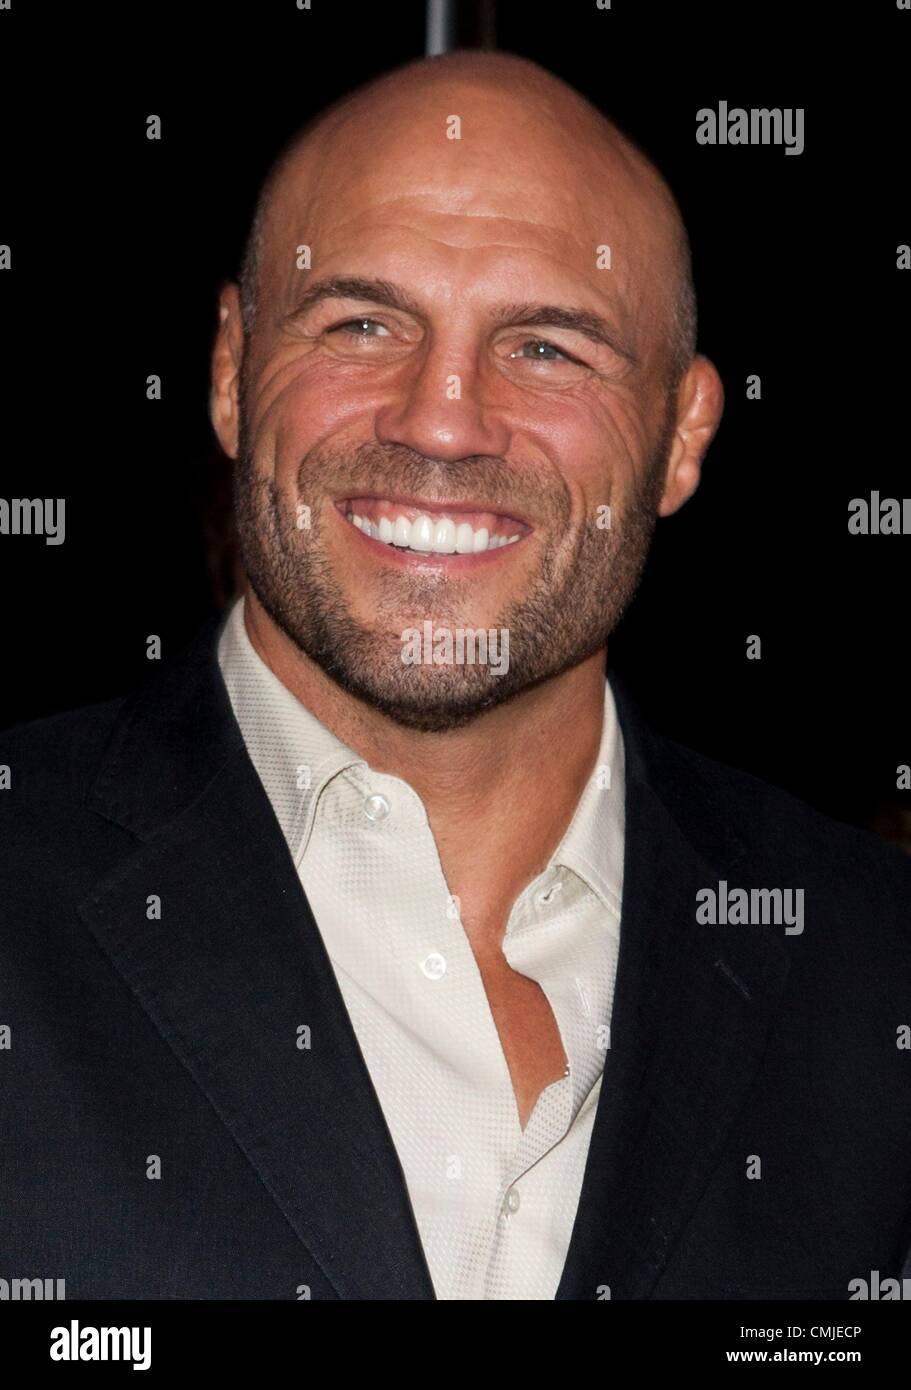 Randy Couture at arrivals for THE EXPENDABLES 2 Premiere, Grauman's Chinese Theatre, Los Angeles, CA August 15, 2012. Photo By: Emiley Schweich/Everett Collection Stock Photo